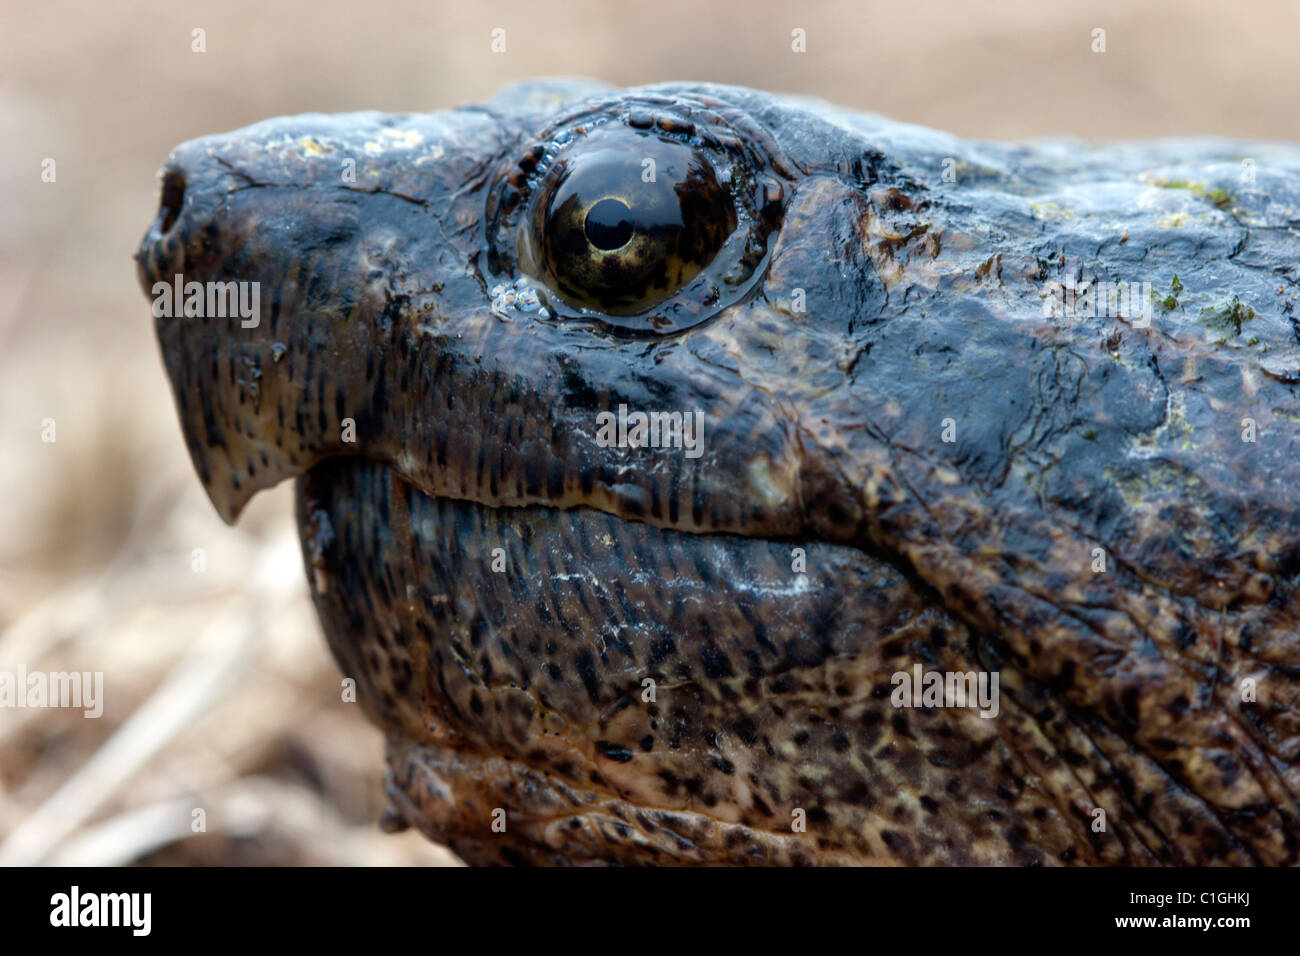 Grand sang-froid Reptile Tortue serpentine close up macro portrait Banque D'Images